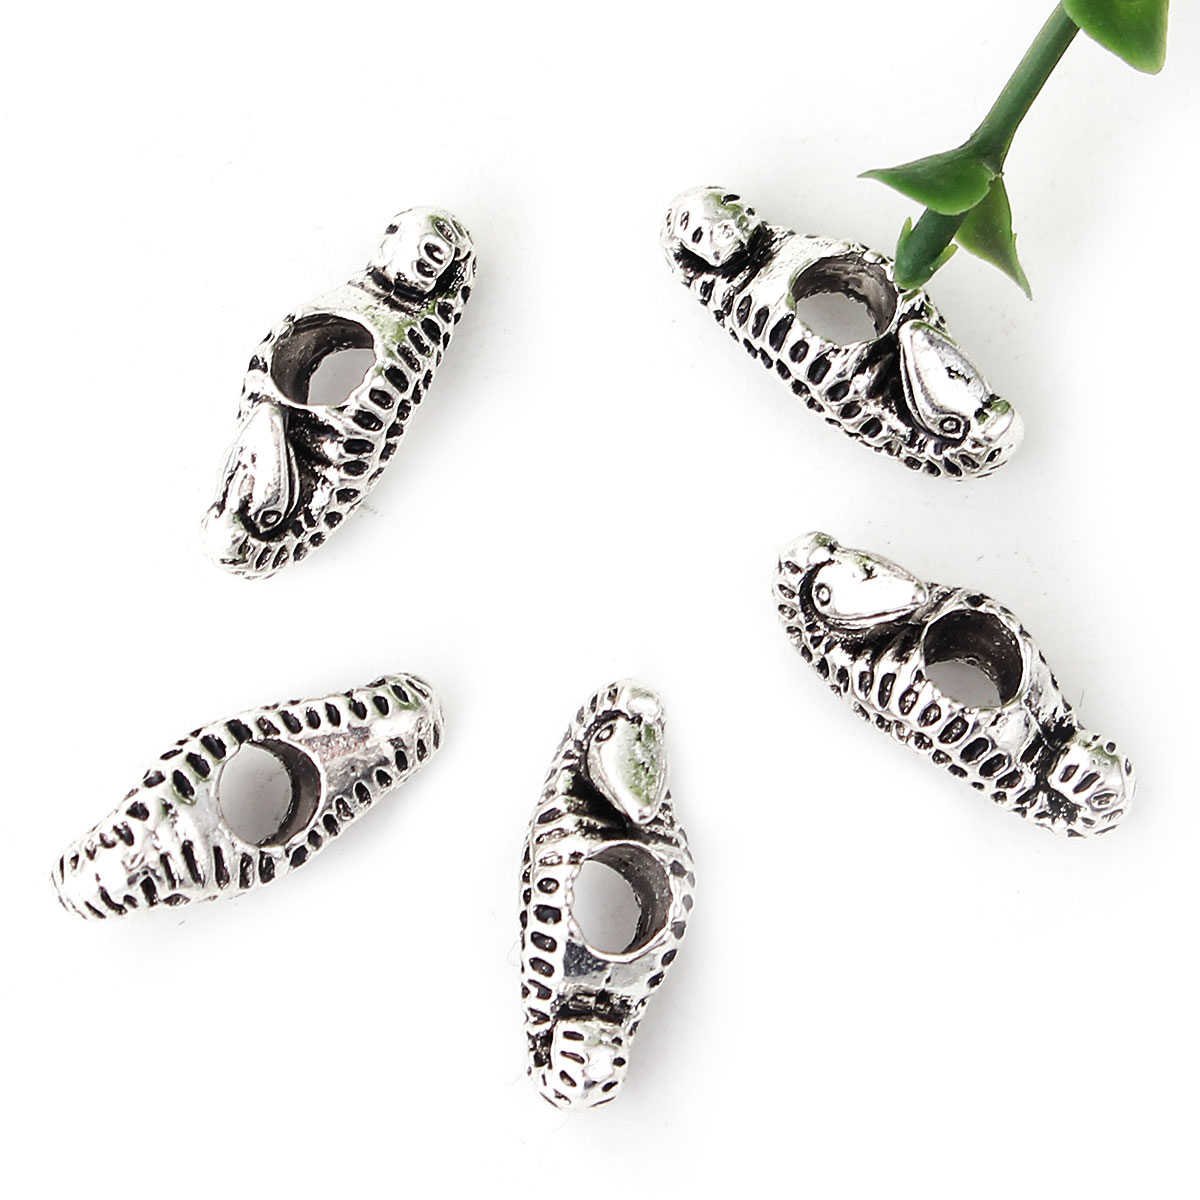 Picture of Zinc Based Alloy Spacer Beads Seahorse Animal Antique Silver 20mm x 8mm, Hole: Approx 4.6mm, 30 PCs